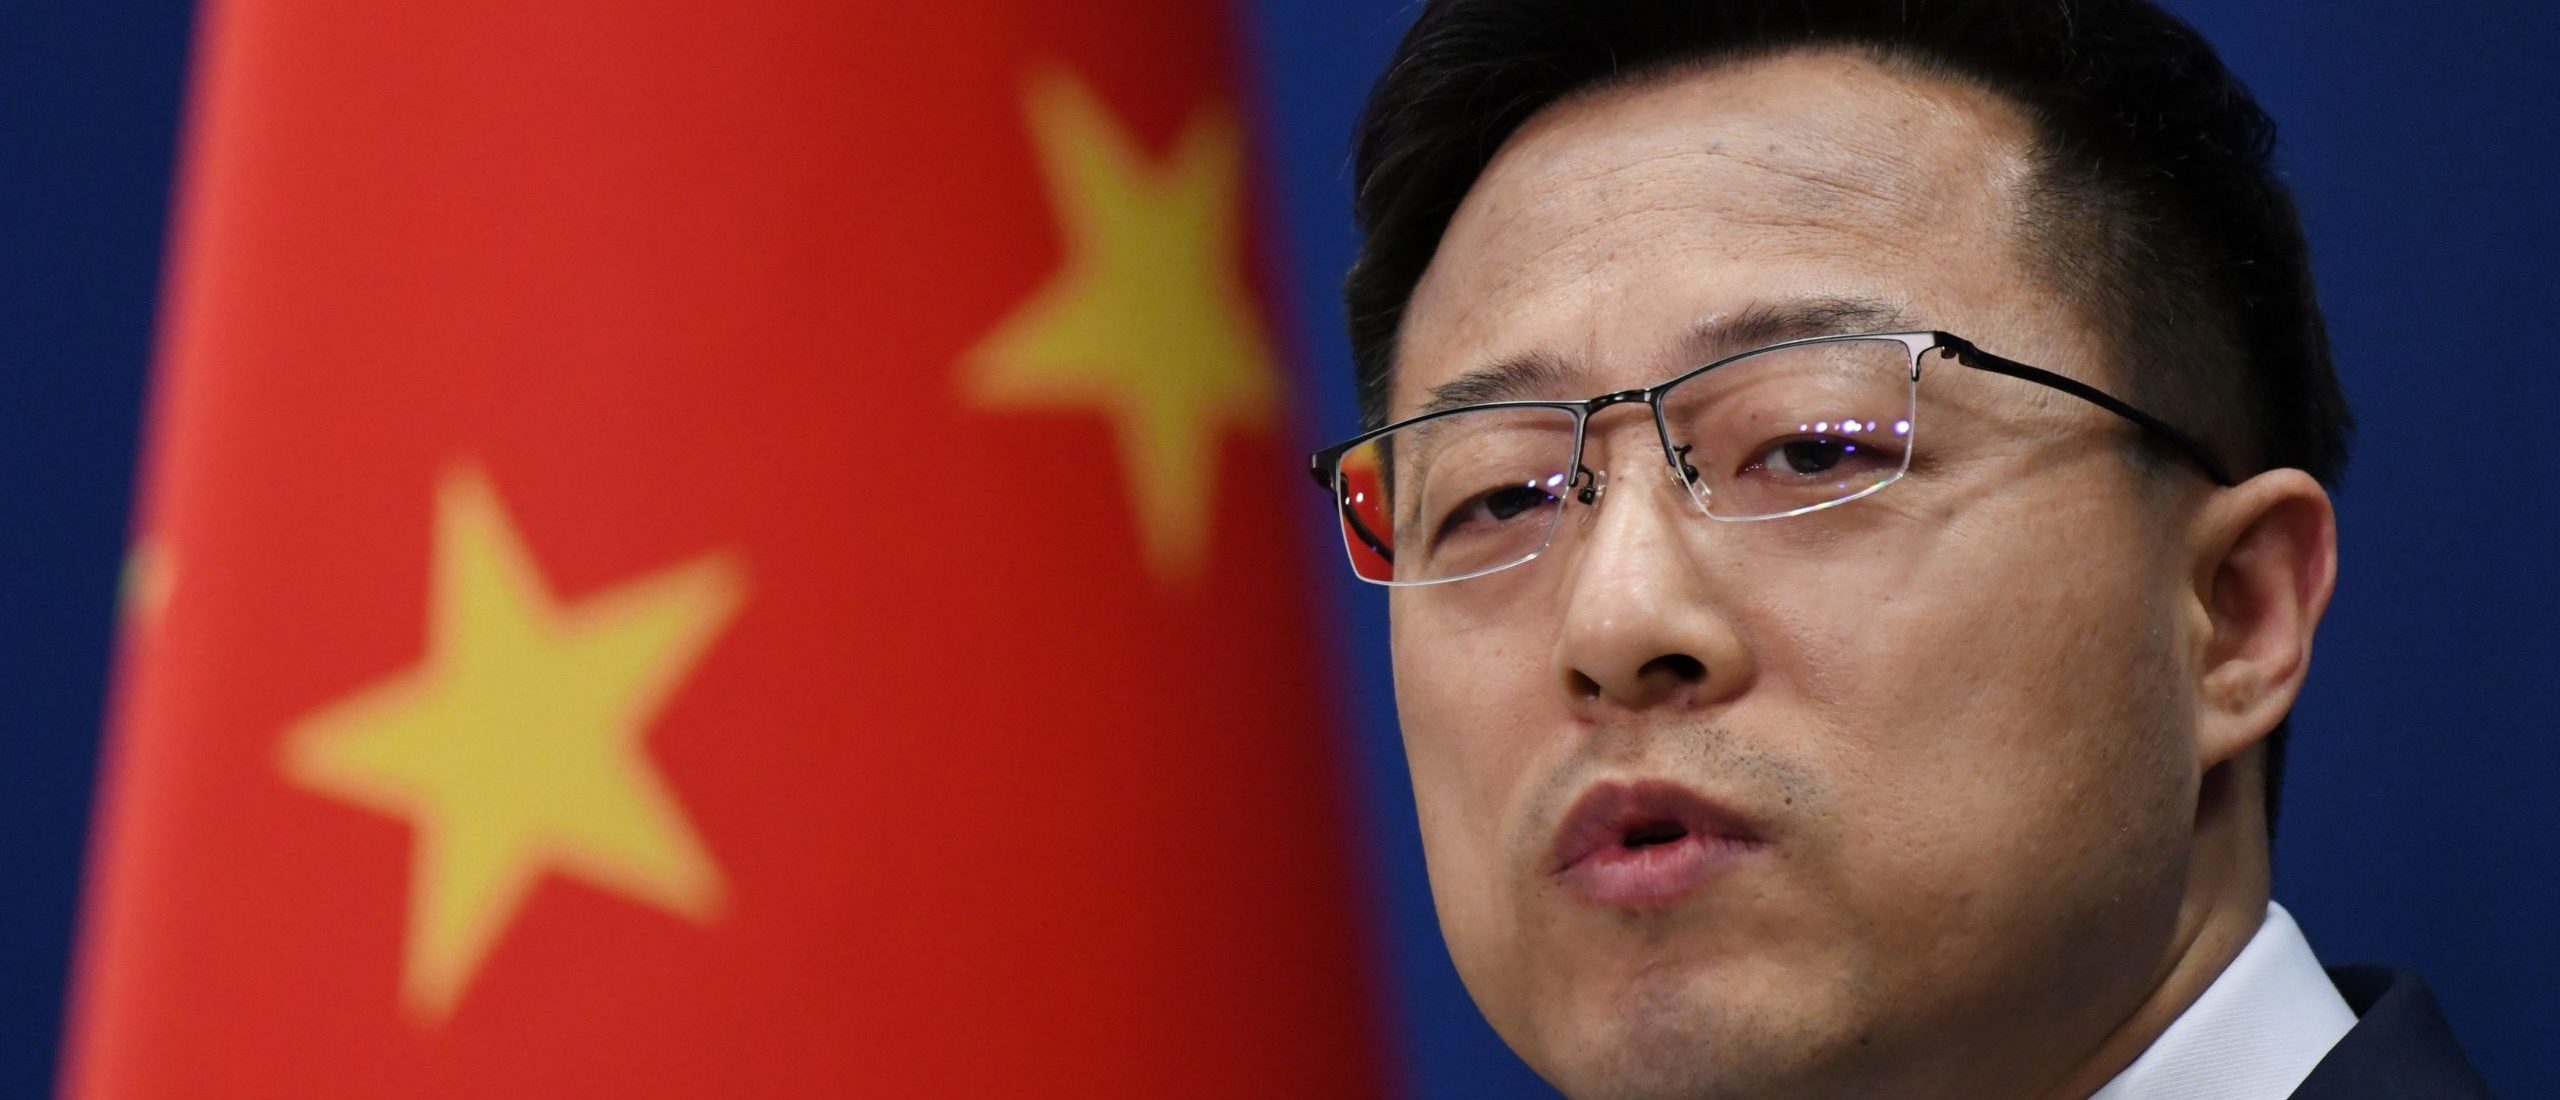 Chinese Foreign Ministry spokesman Zhao Lijian speaks at the daily media briefing in Beijing on April 8, 2020.